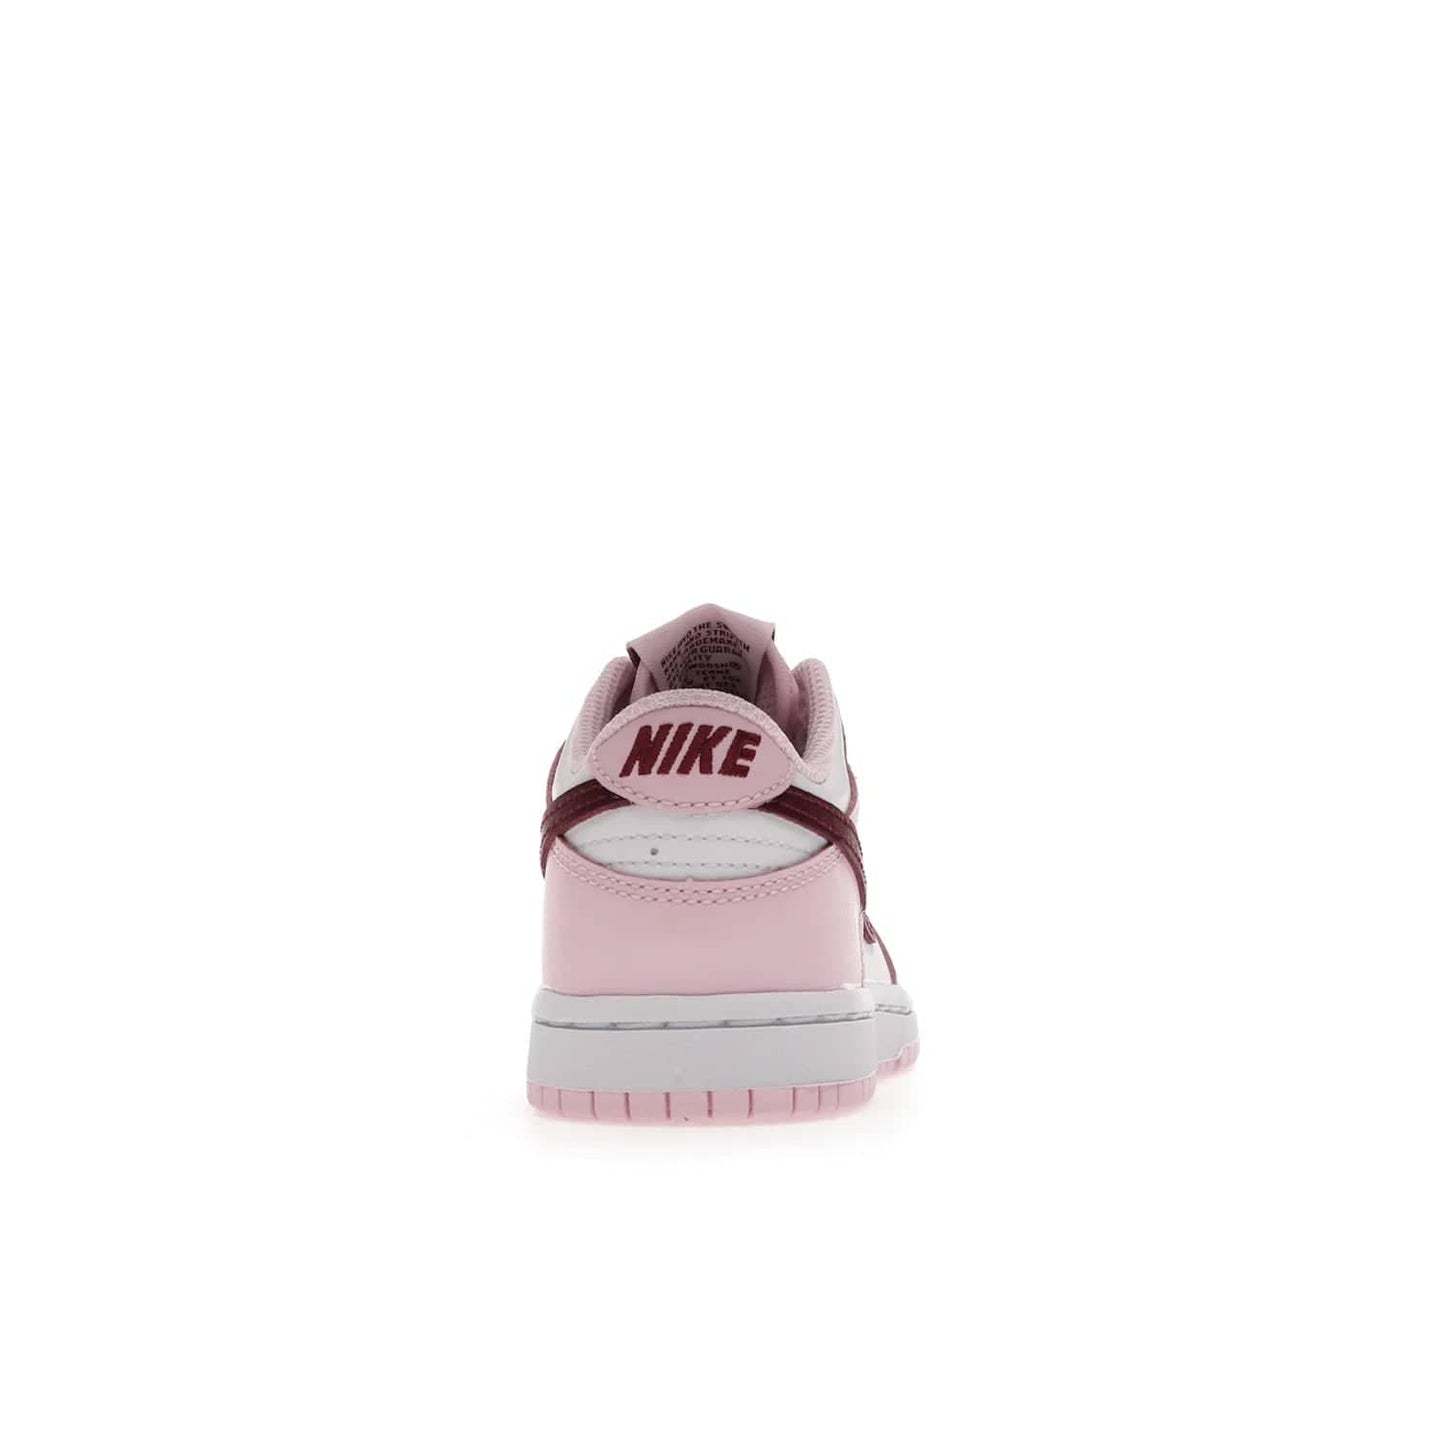 Nike Dunk Low Pink Red White (PS) - Image 28 - Only at www.BallersClubKickz.com - Introducing the Nike Dunk Low Pink Red White (PS), the perfect addition to your sneaker collection. A classic silhouette with modern vibrant colors, including a pink upper with red and white accents and a white midsole. Comfort and durability, perfect for any outfit. Limited edition, available June 22nd.